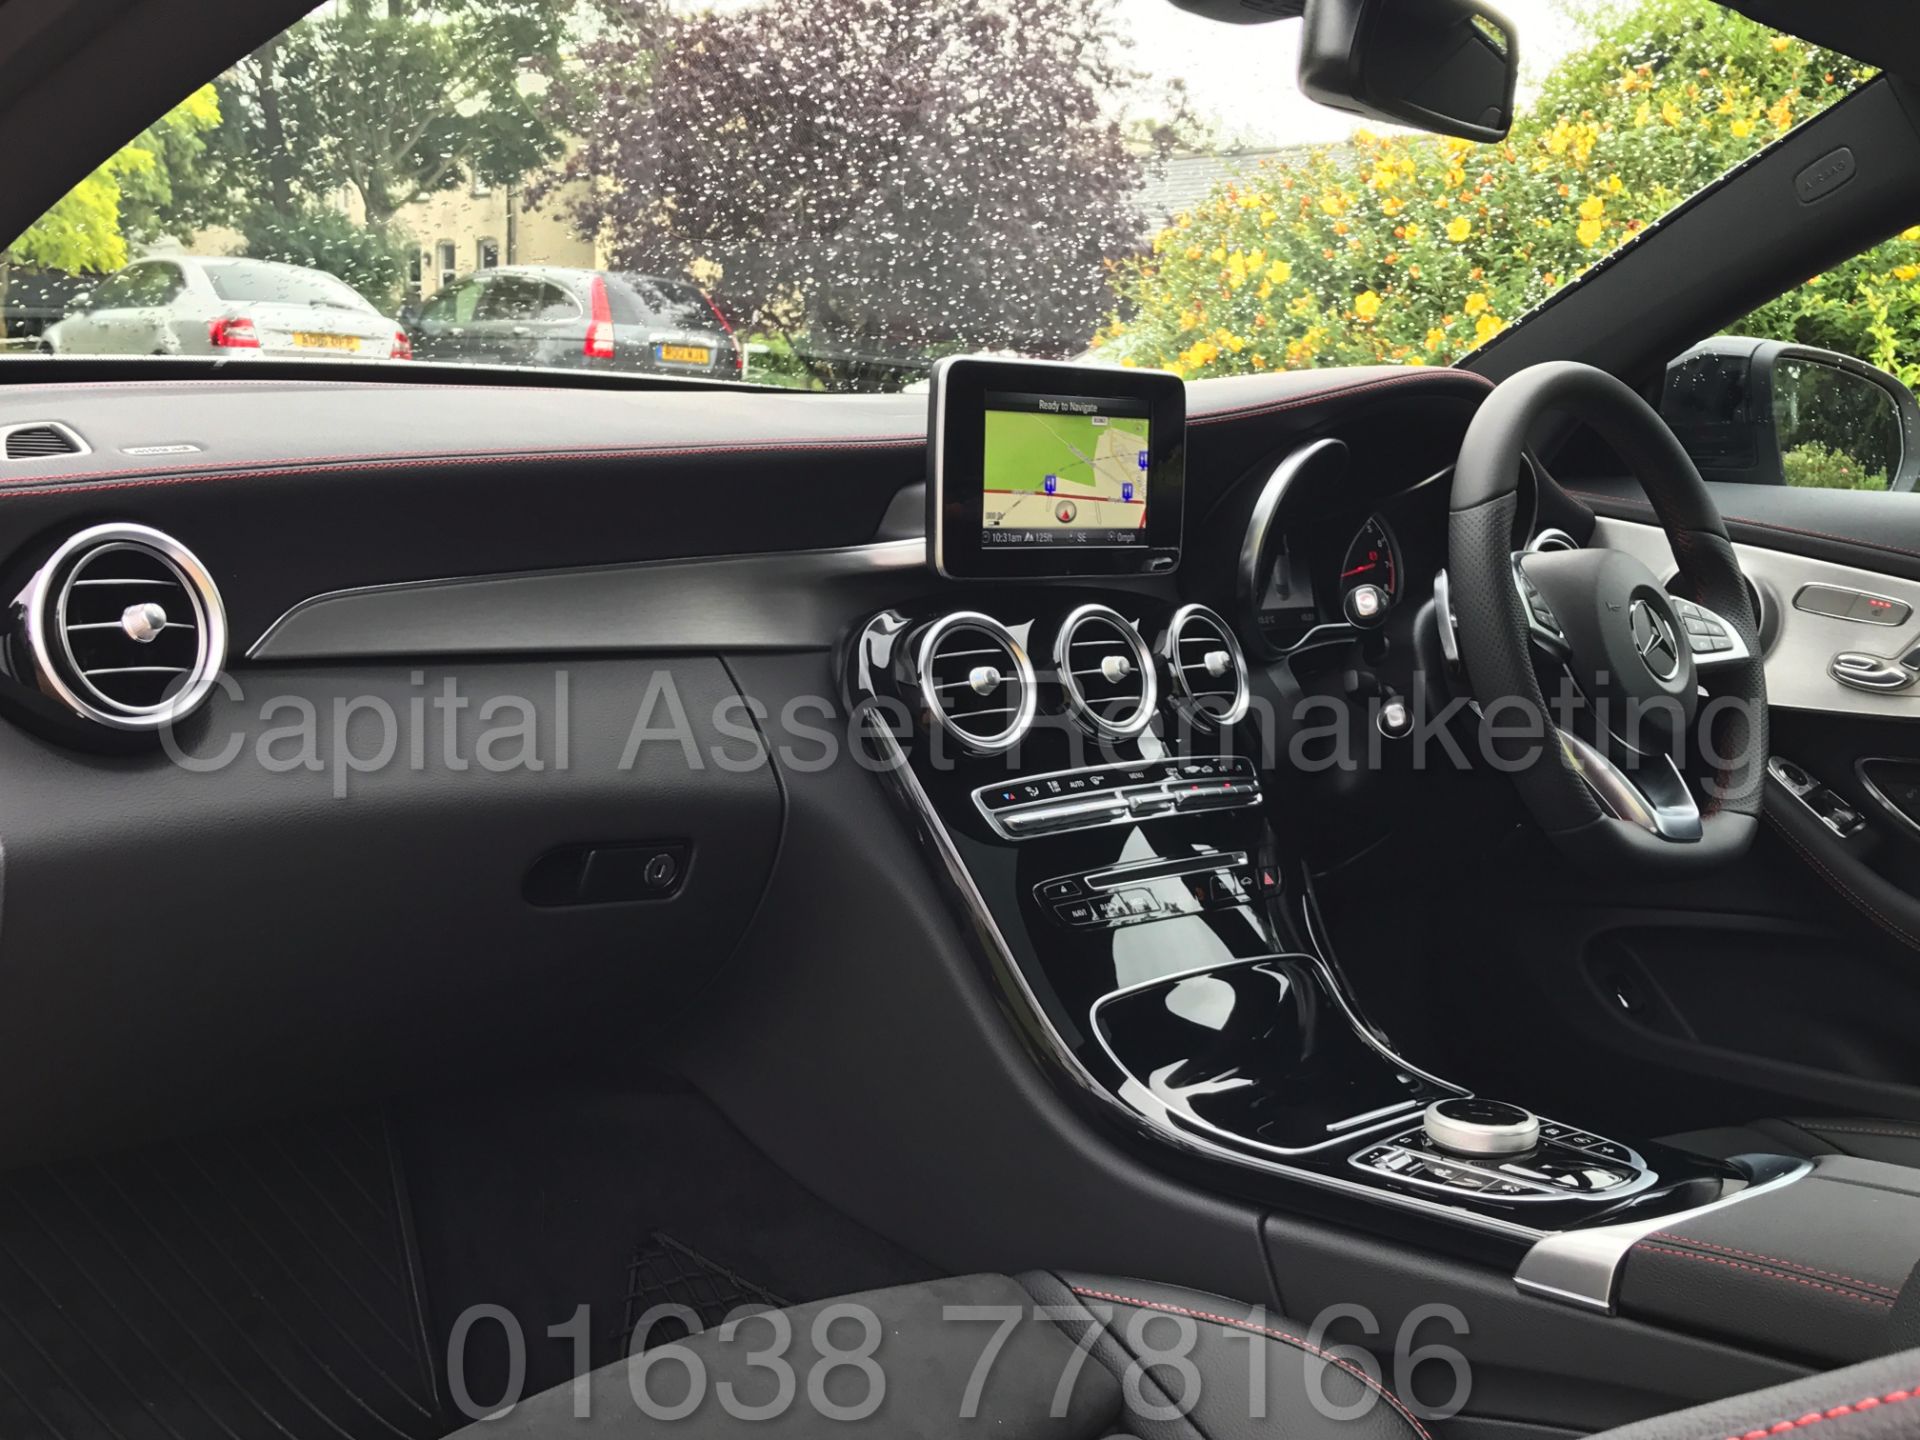 MEREDES-BENZ C43 AMG PREMIUM '4 MATIC' COUPE (2017) '9-G AUTO - LEATHER - SAT NAV' **FULLY LOADED** - Image 27 of 57